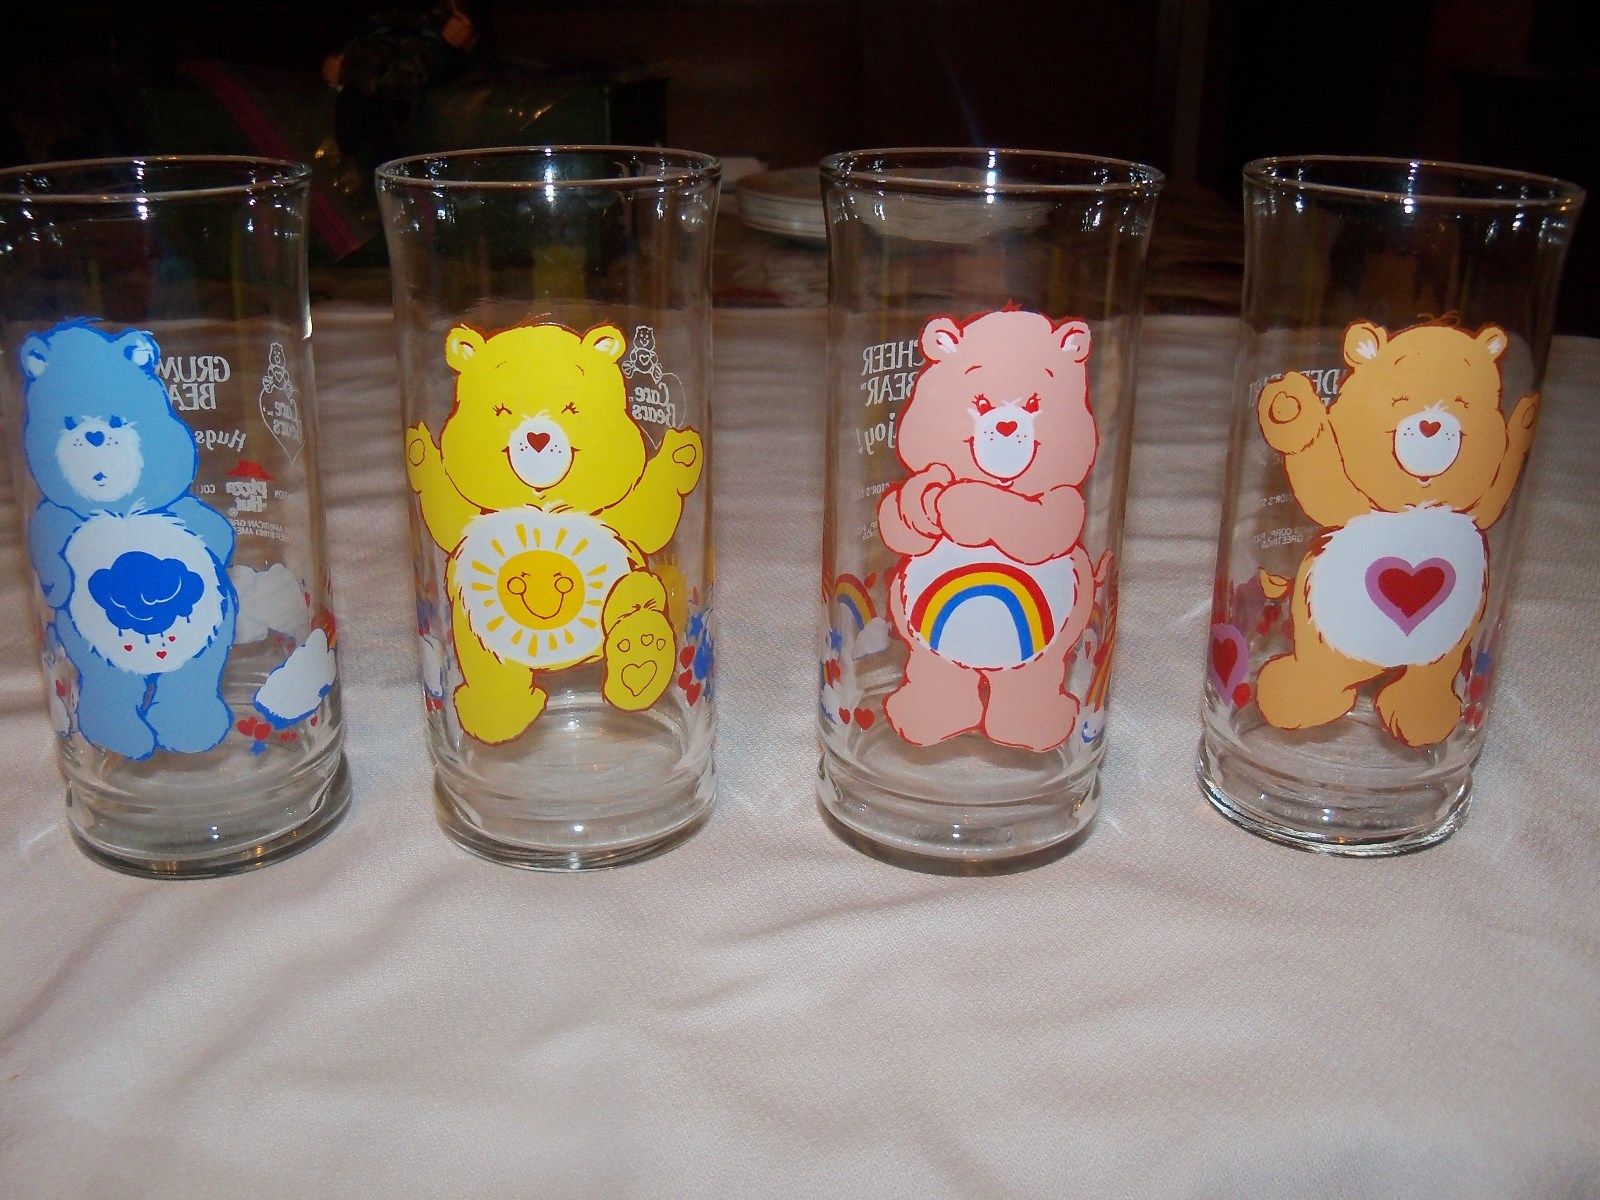 Care Bears Limited Edition Pizza Hut Drinking Glasses Set Of 4-1983 VINTAGE RARE